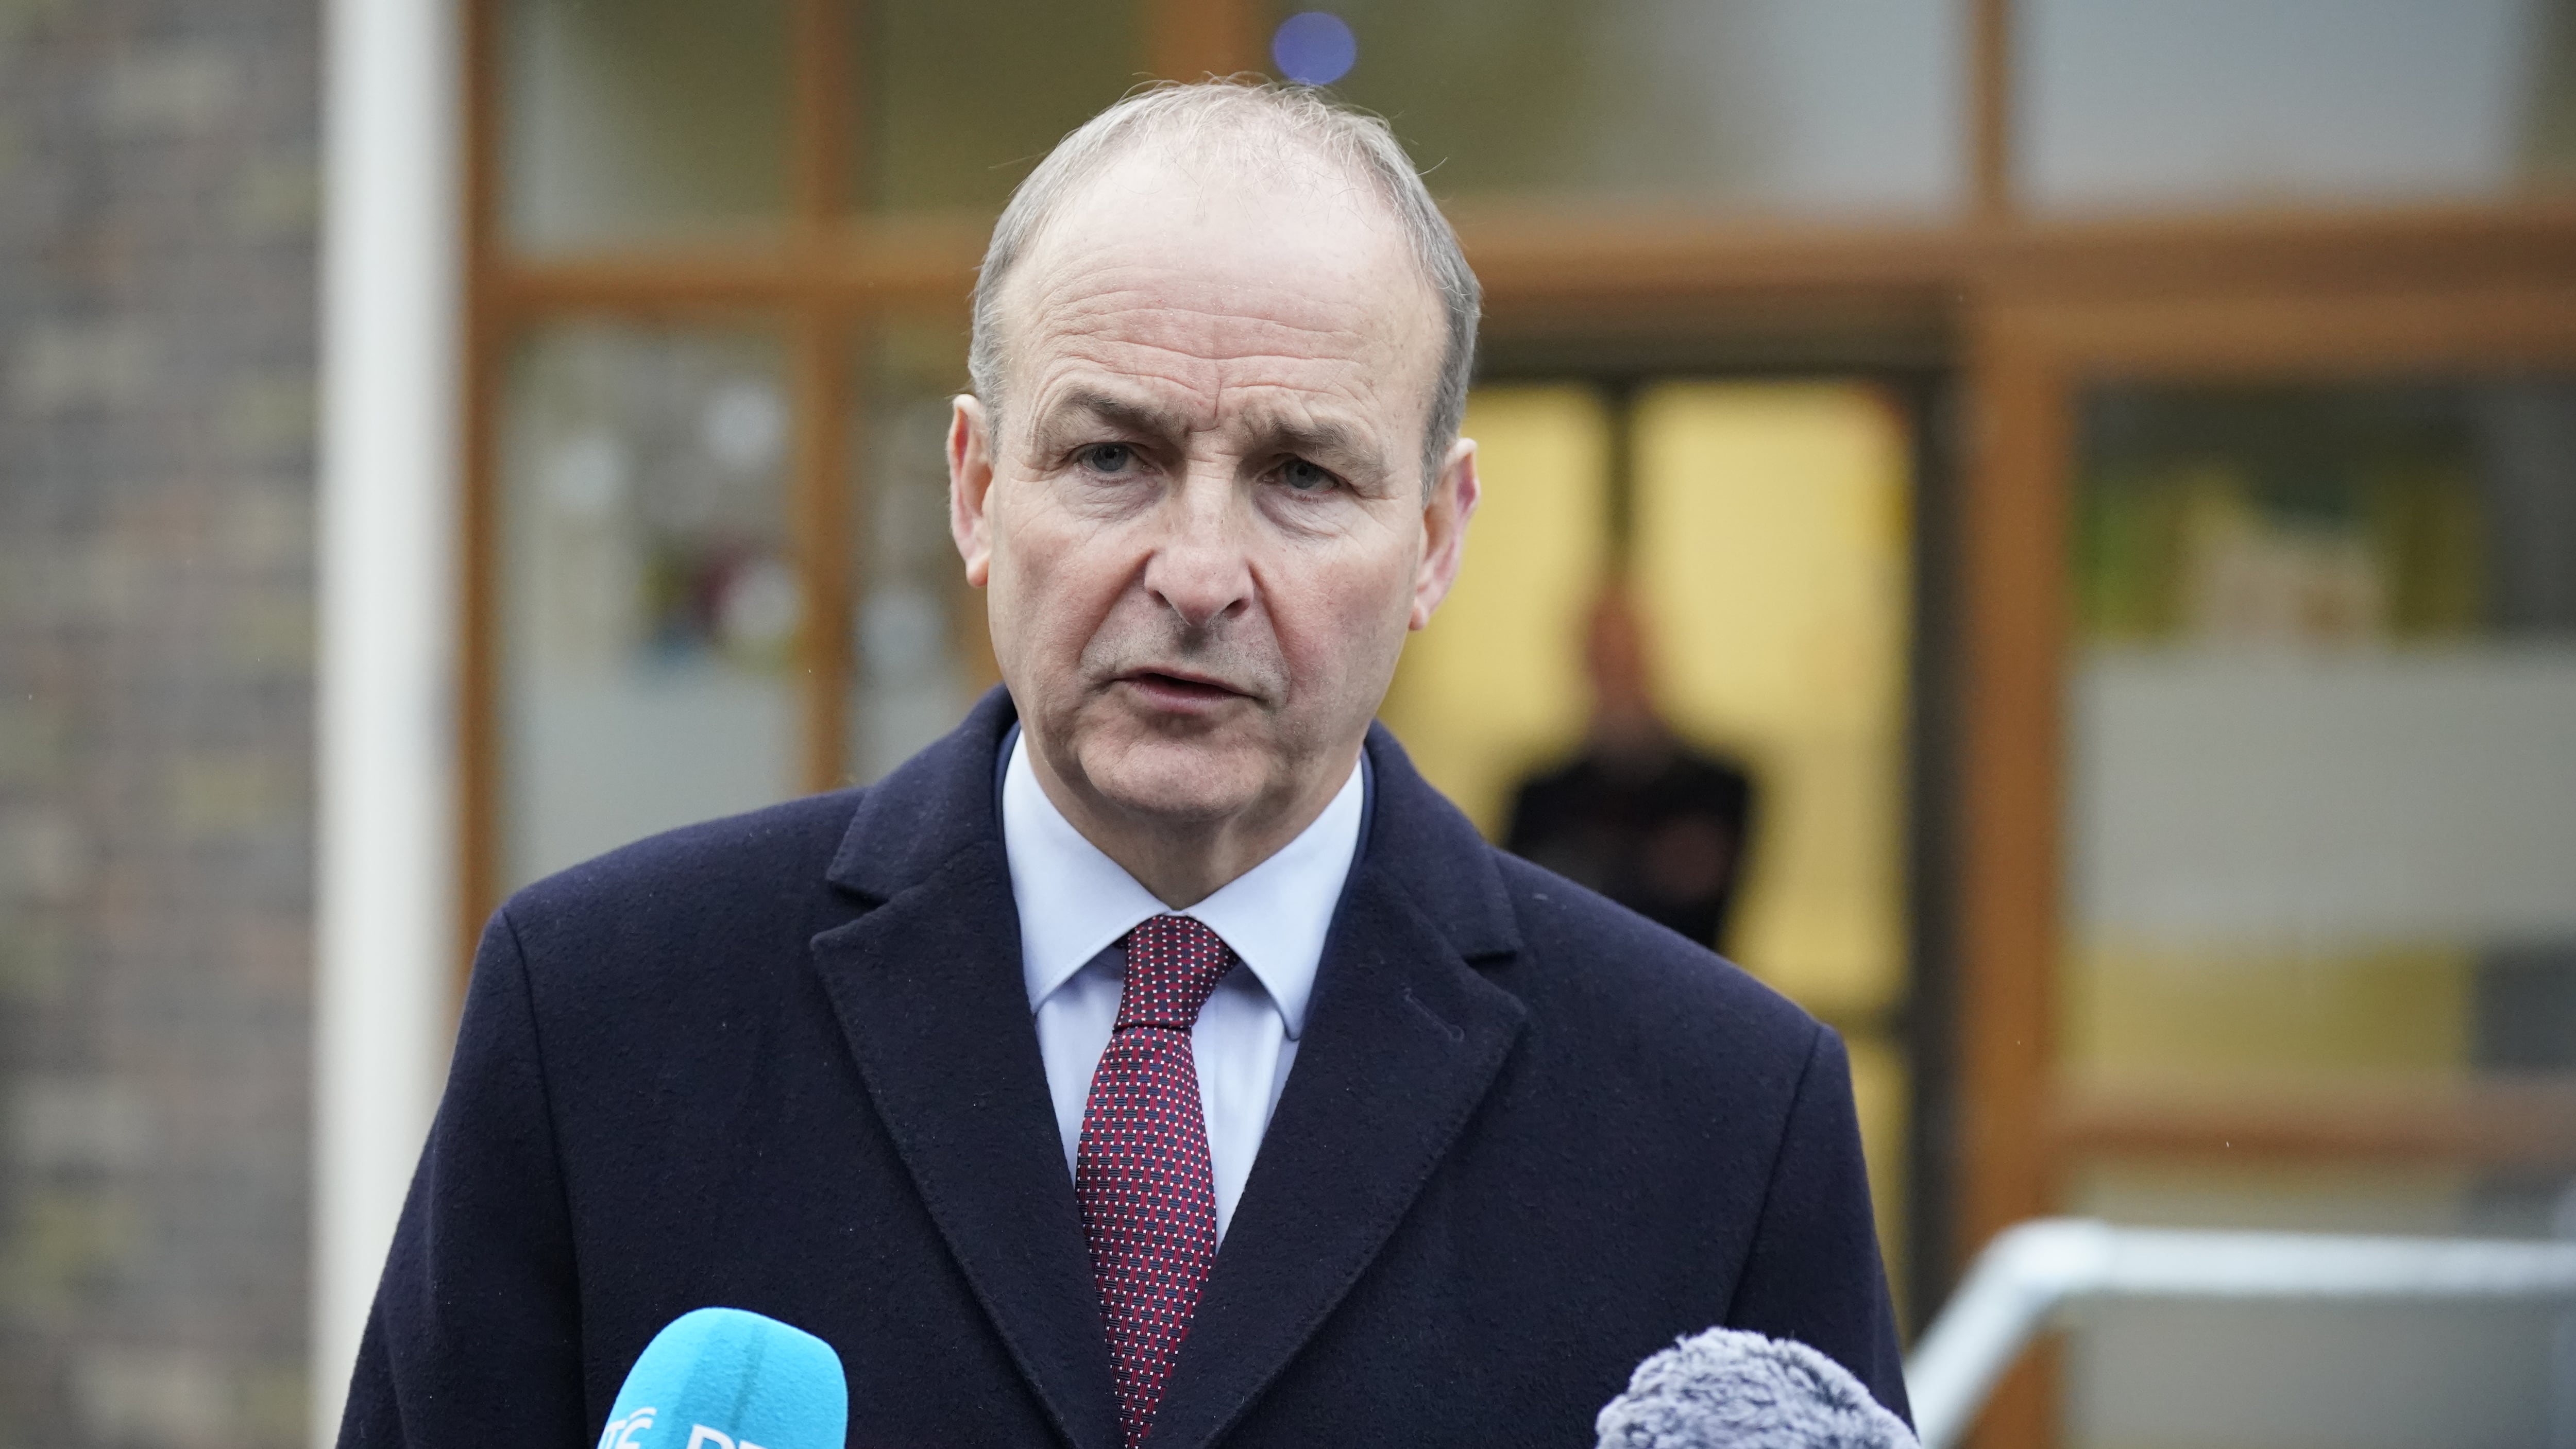 Micheal Martin has called for action over violence by Israeli settlers in the West Bank